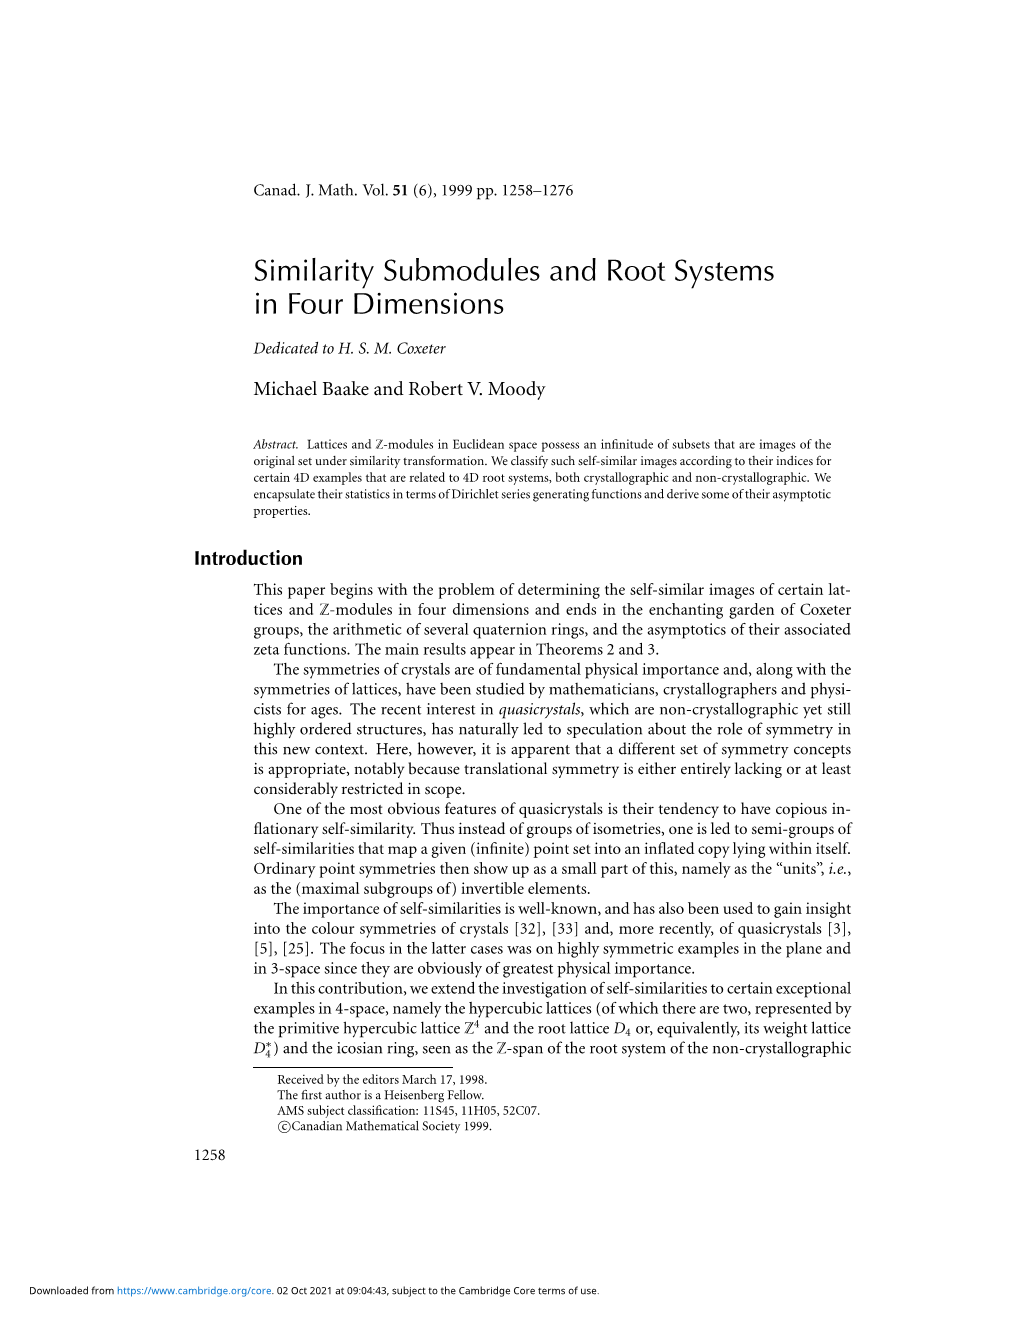 Similarity Submodules and Root Systems in Four Dimensions